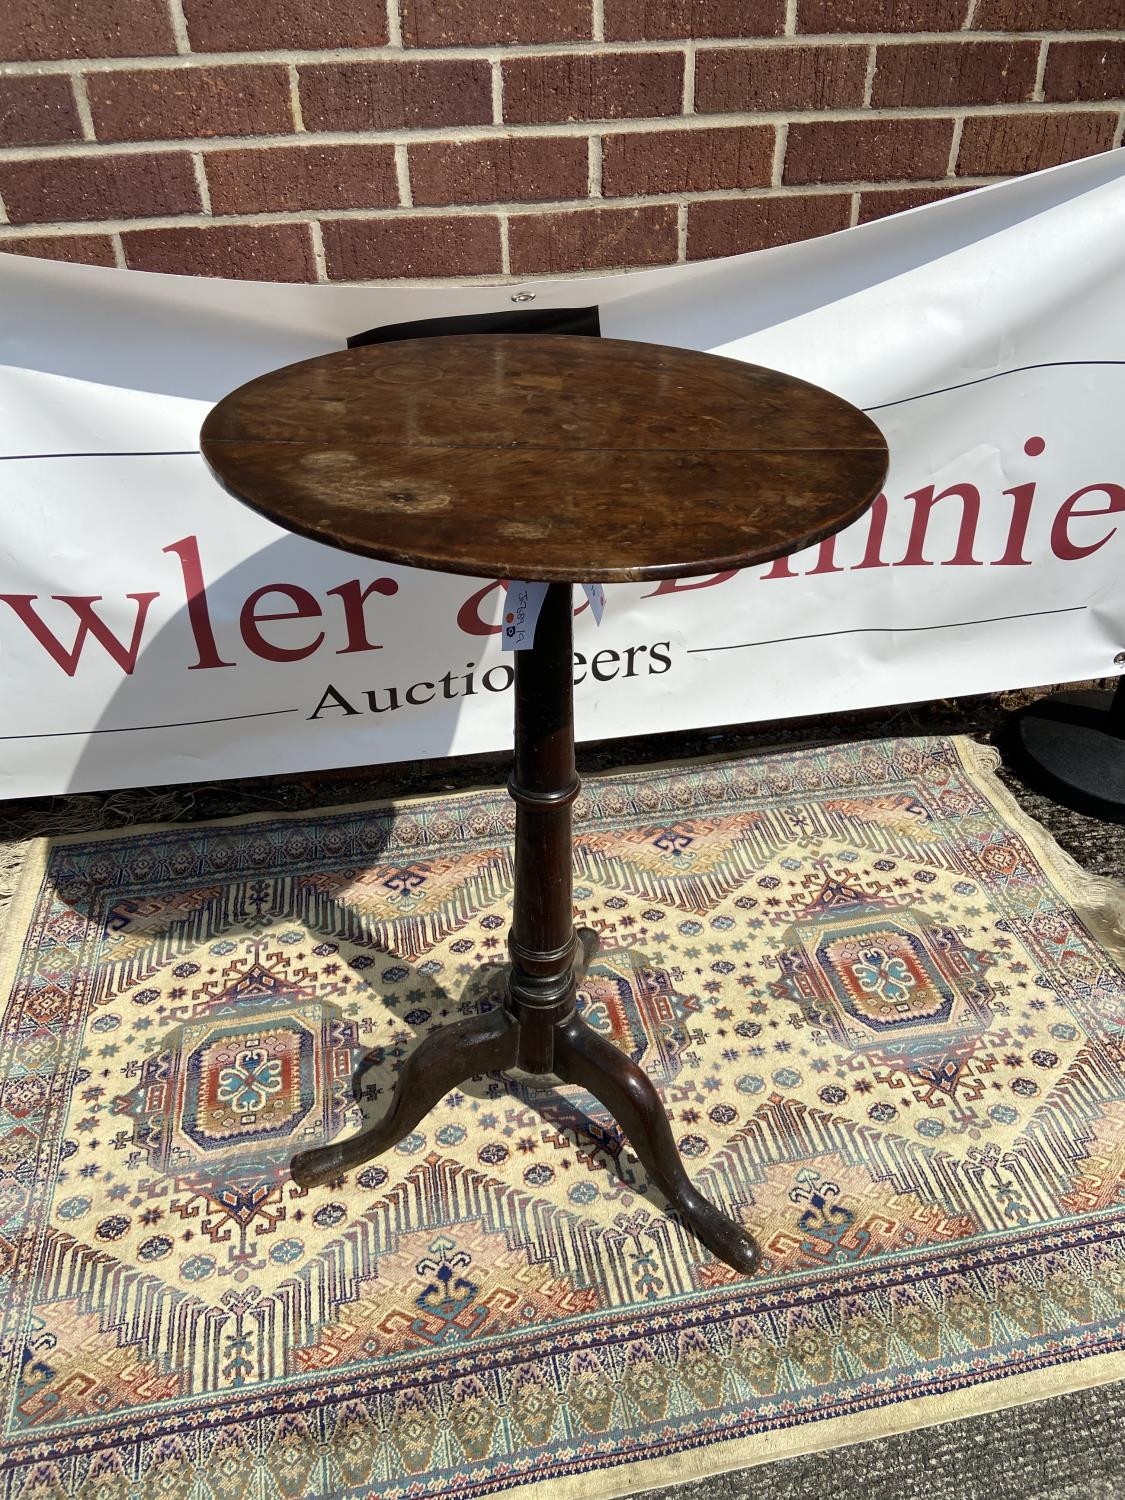 Queen Anne walnut candle stand (early 18th century) circular top above a slender ring-turned